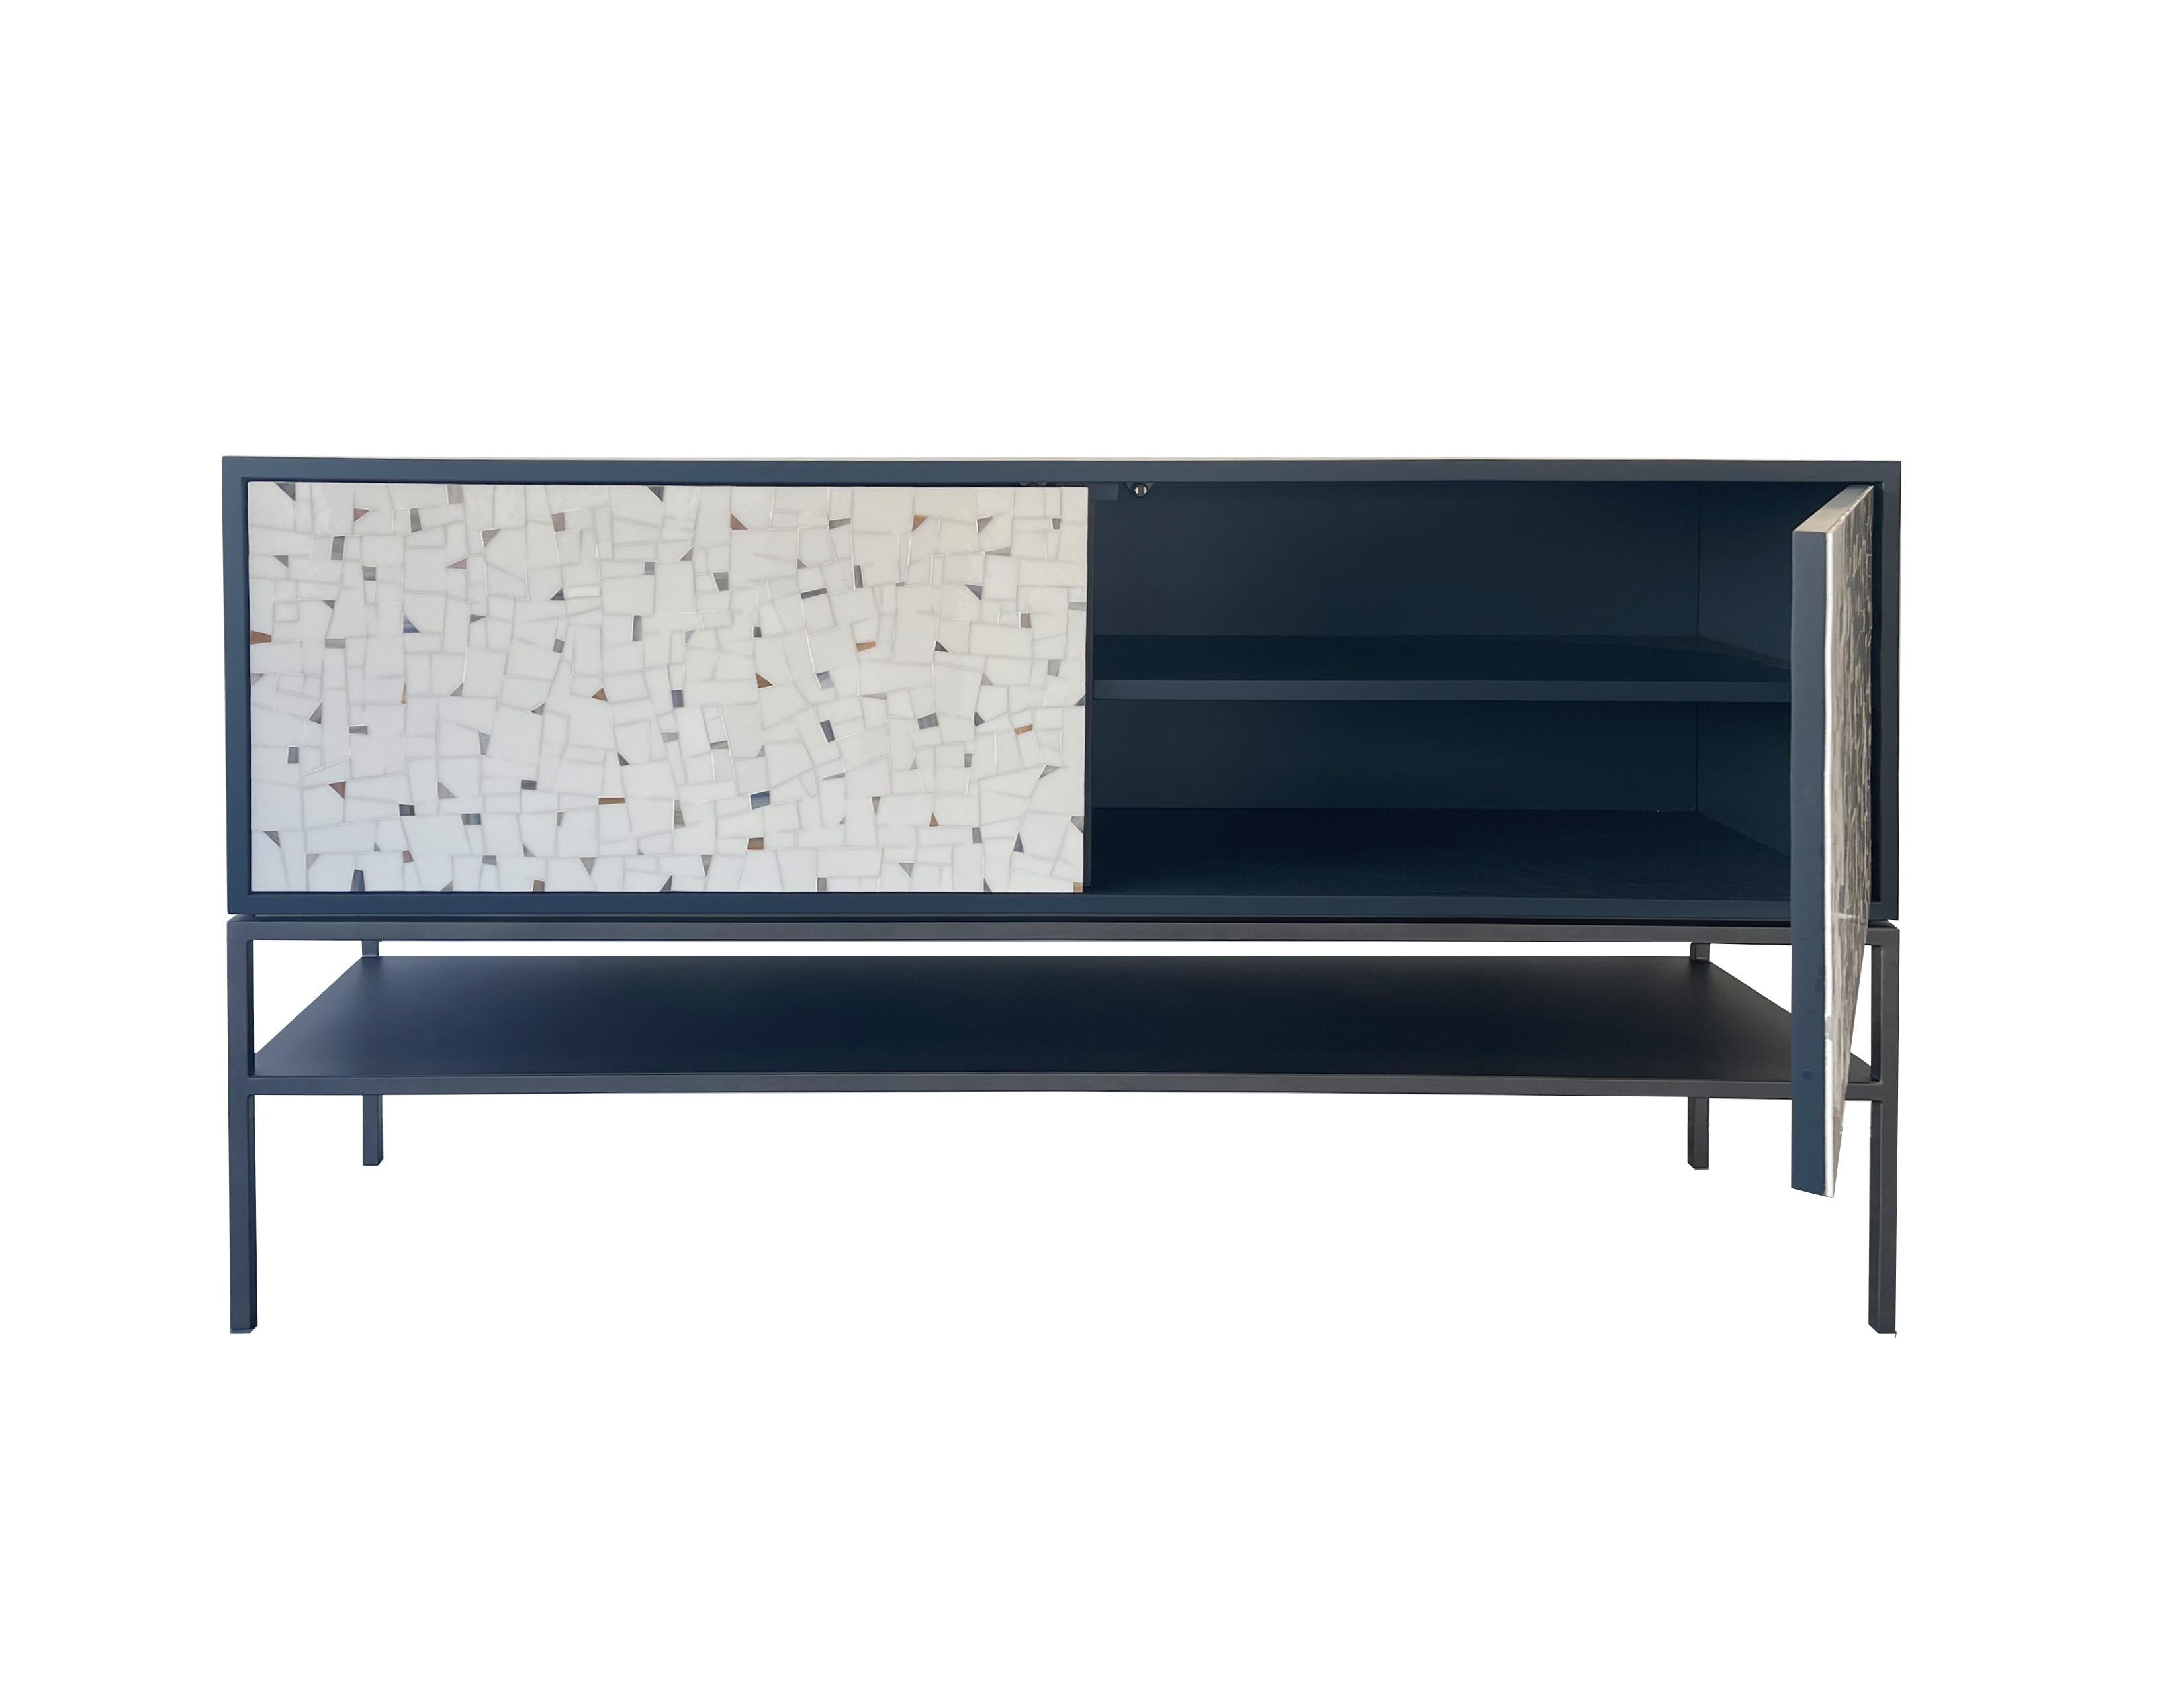 Our 2- door serving buffet by Ercole Home is a touch latch buffet in a custom deep blue matte wood finish. The smoothness of the wood contrasts perfectly with the glossy shine of the terrazzo patterned glass that adorns the front of each door. The